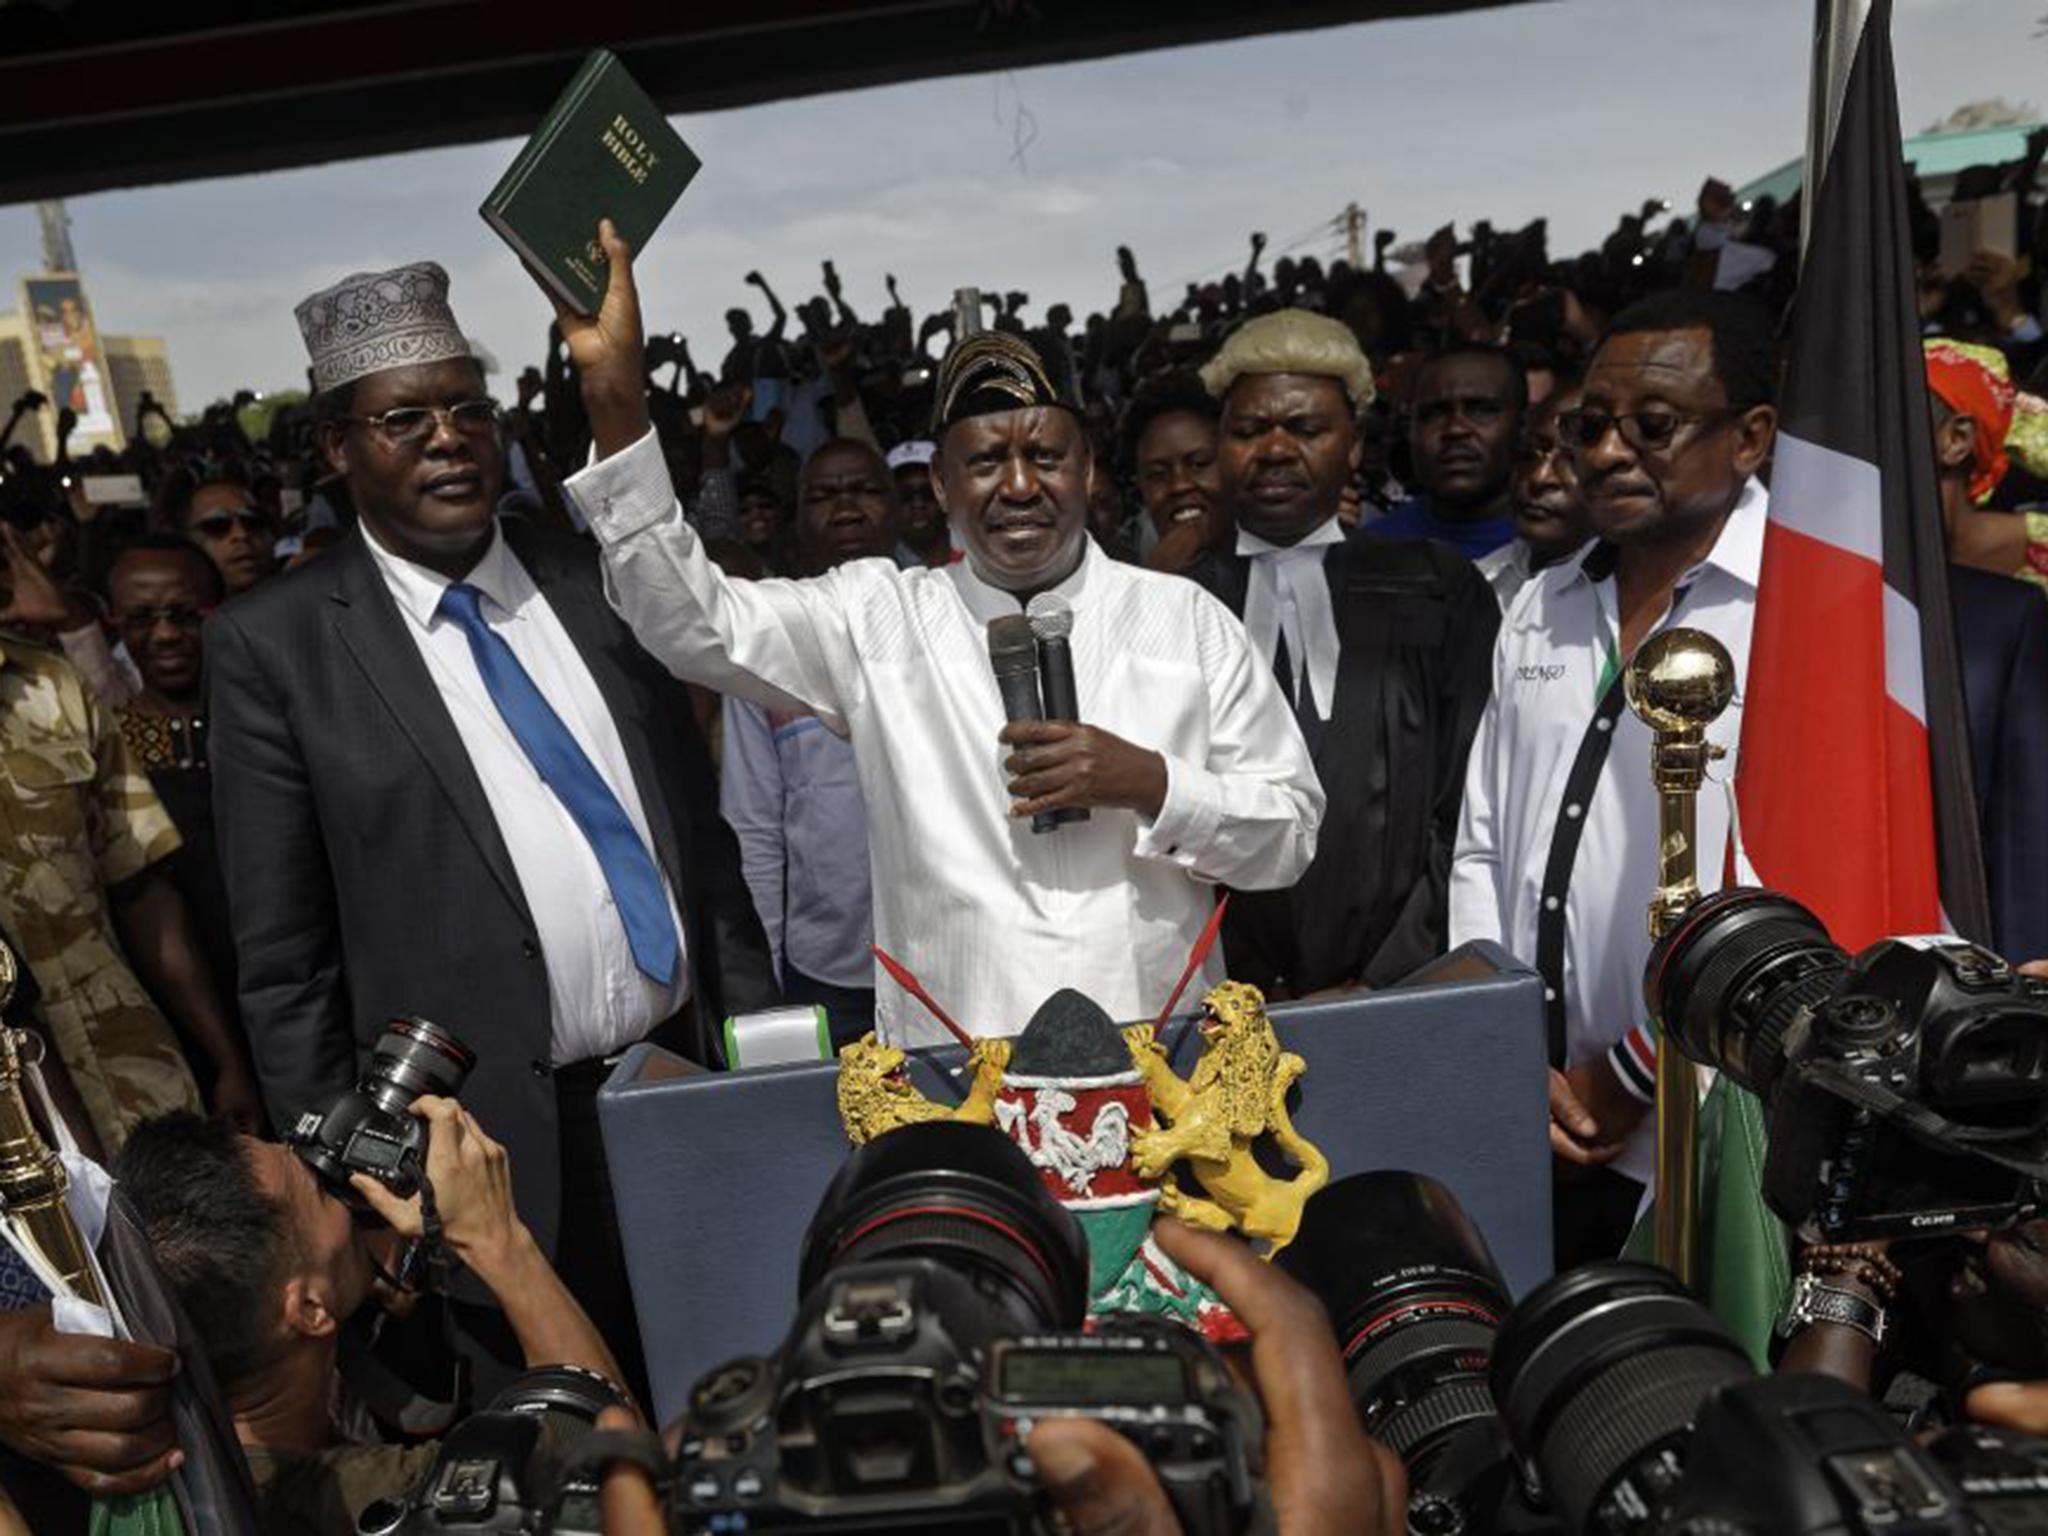 Opposition leader Raila Odinga holds a Bible aloft after professing an oath during his mock swearing-in ceremony